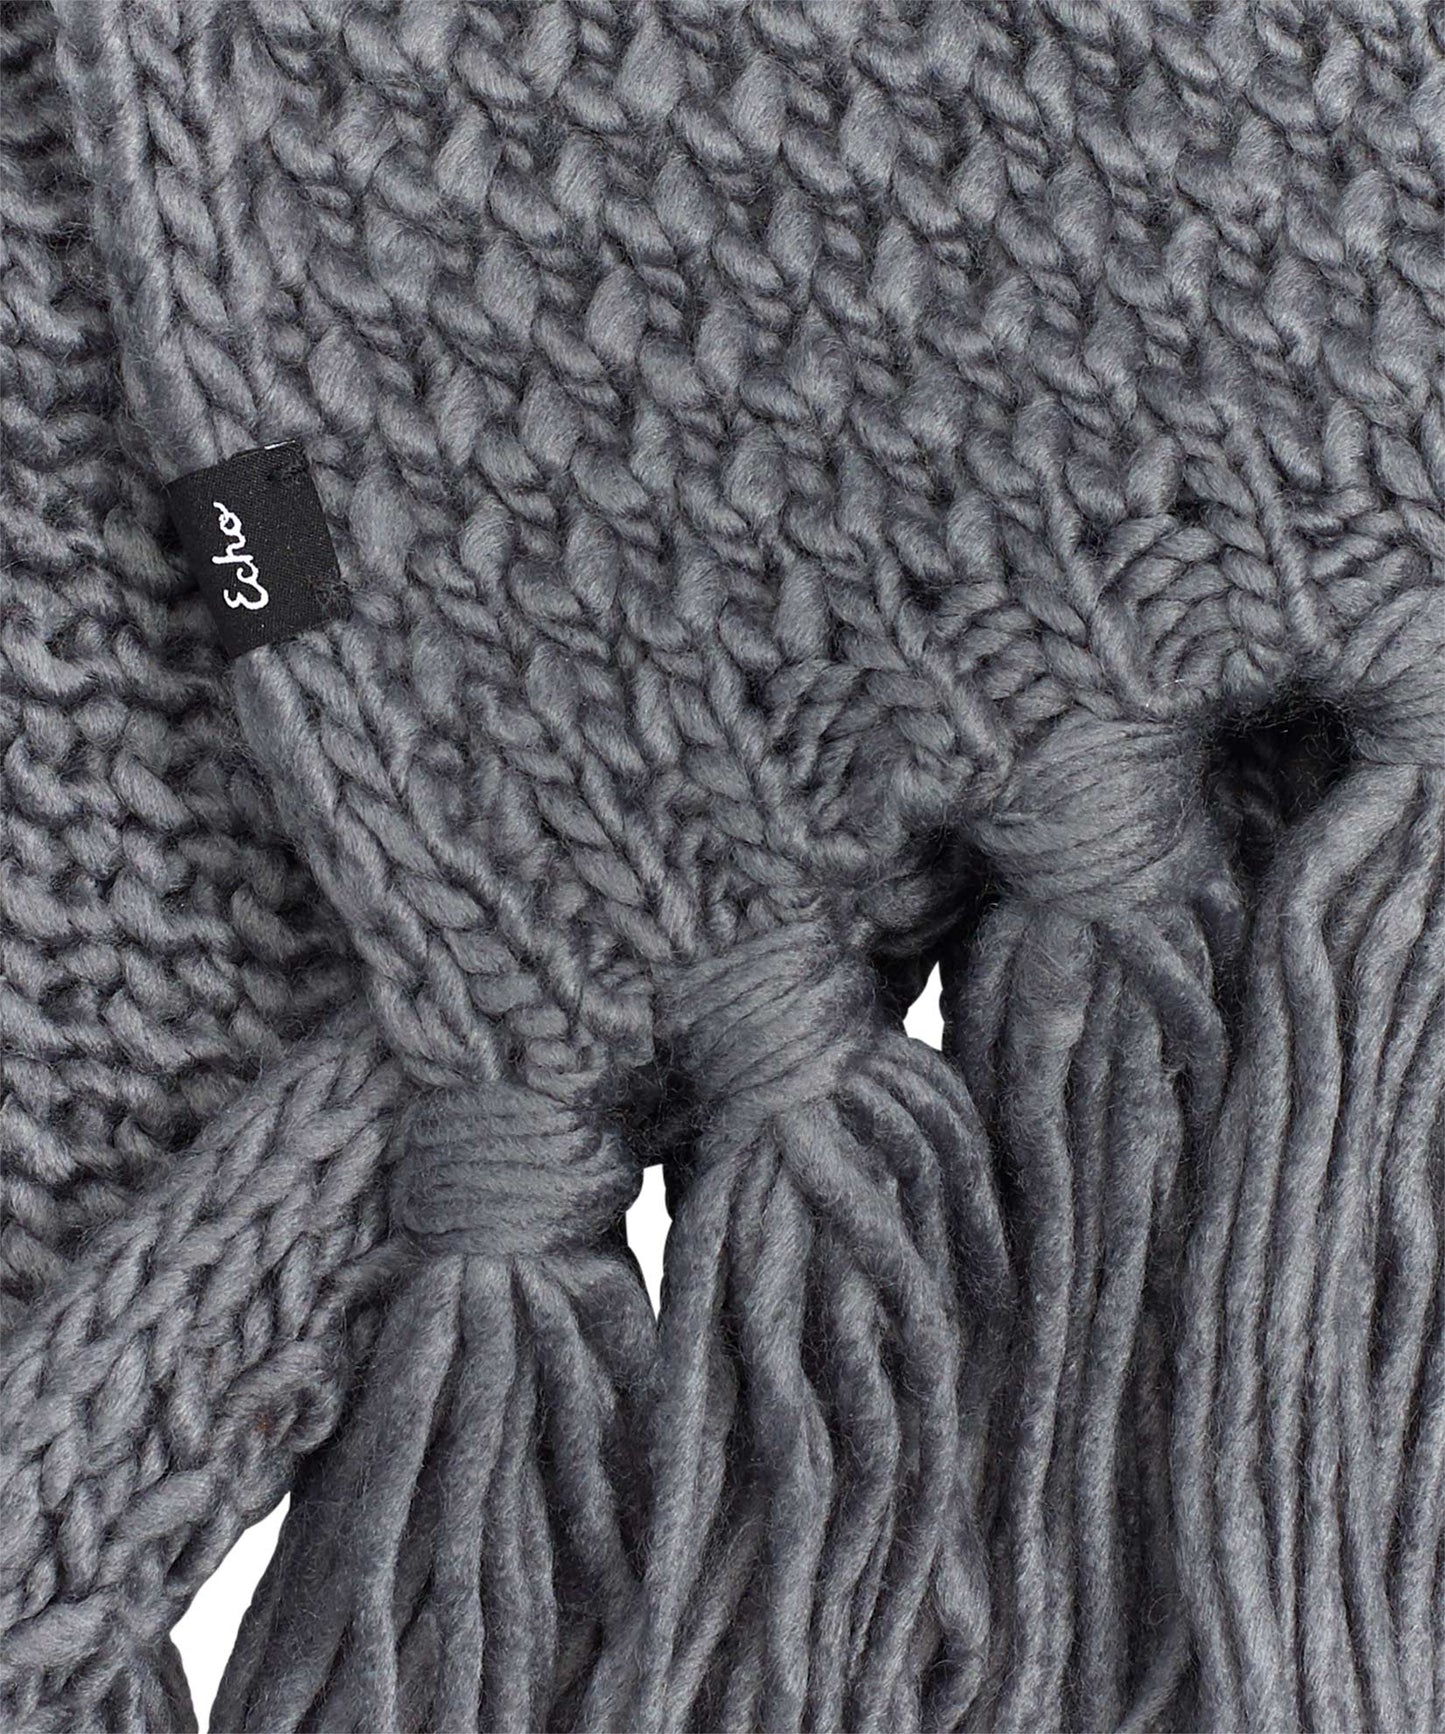 Chunky Scarf With Fringe in color Echo Charcoal